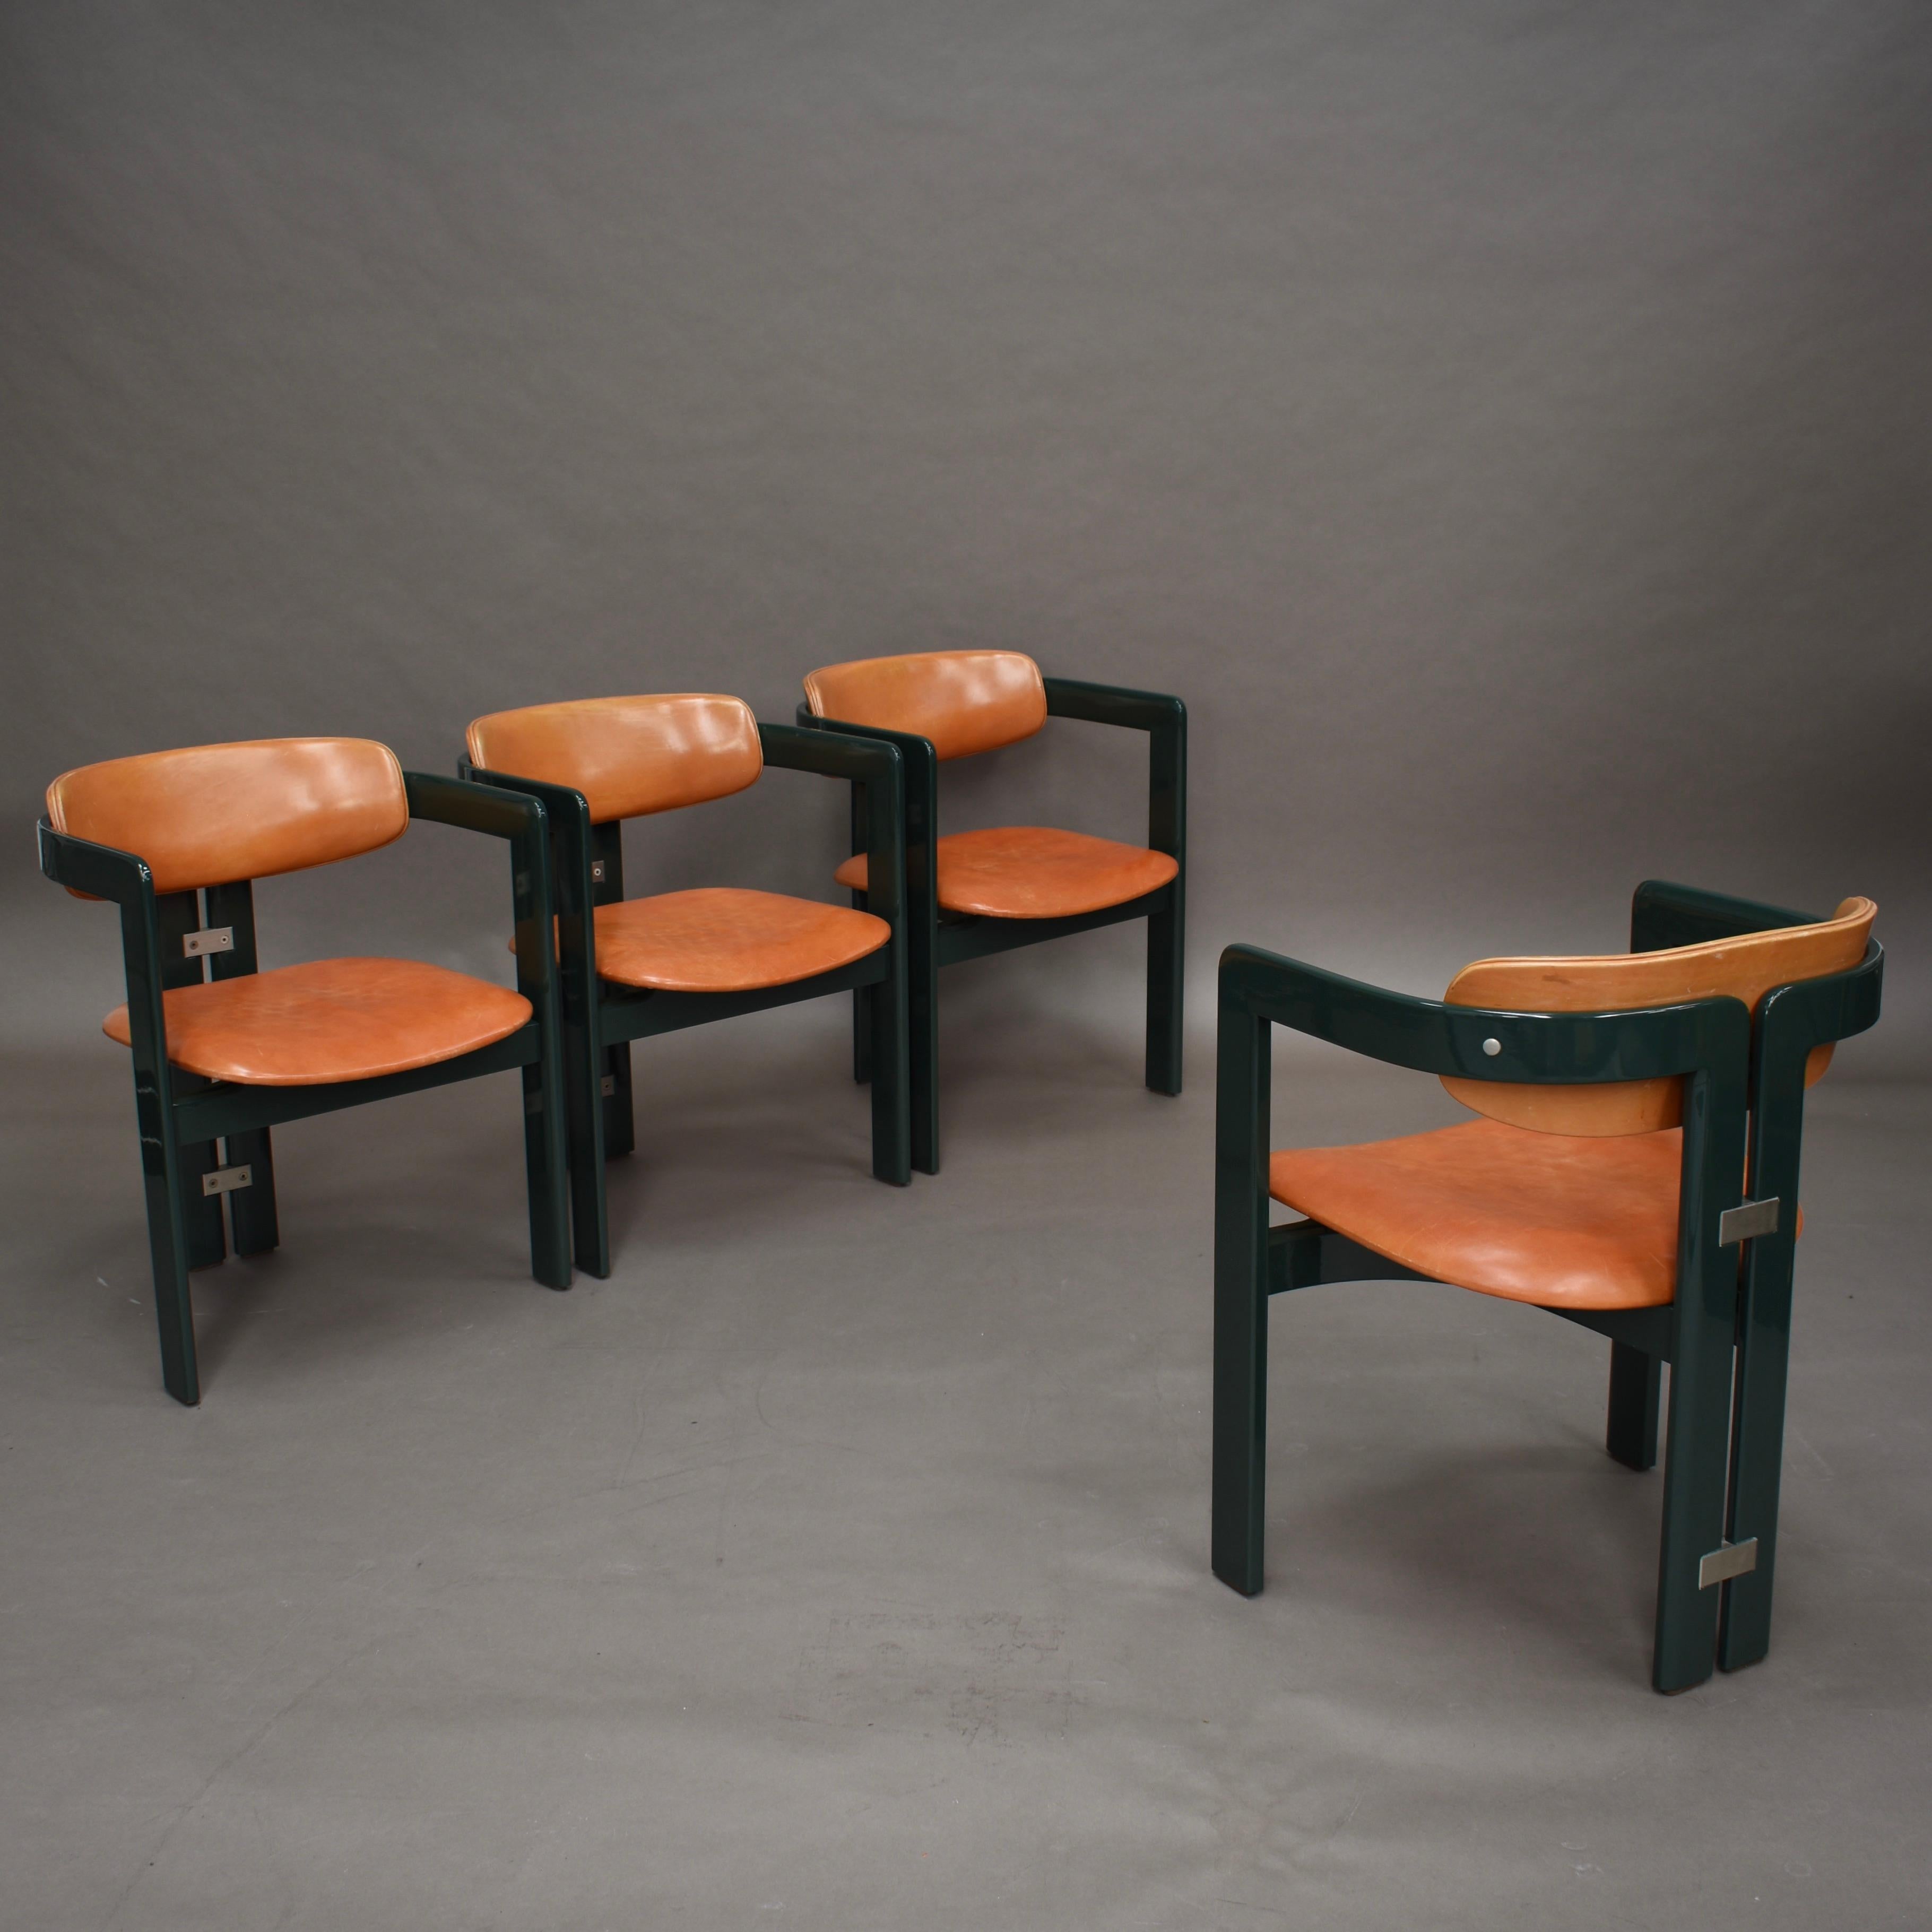 Mid-Century Modern Pamplona Chairs by Augusti Savini in Green and Tan Leather, Italy, 1965